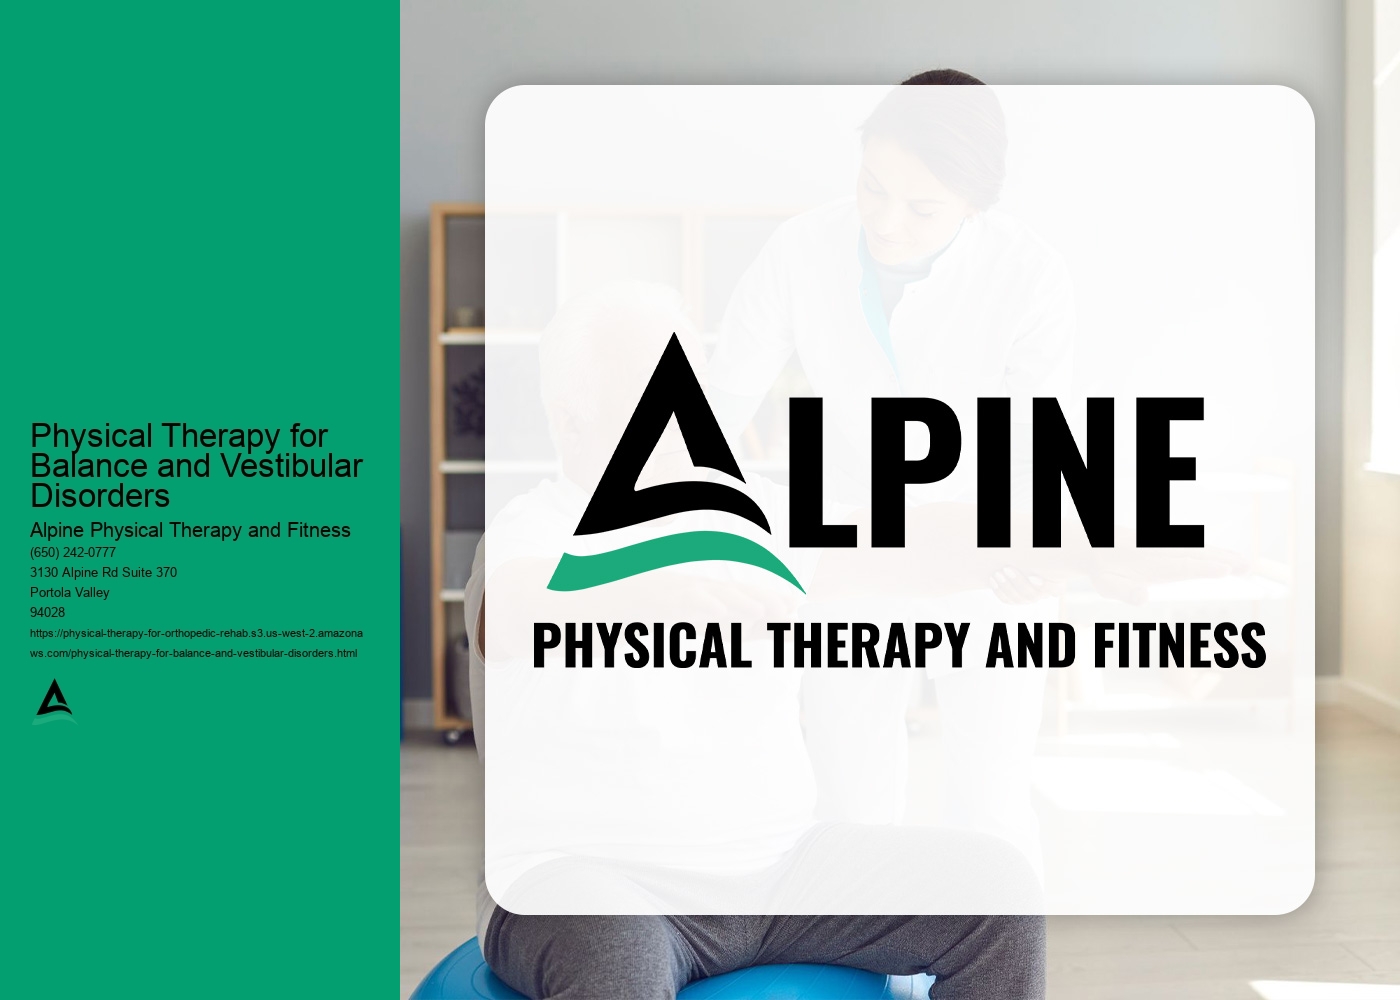 What should someone expect during their first physical therapy session for balance and vestibular disorders?